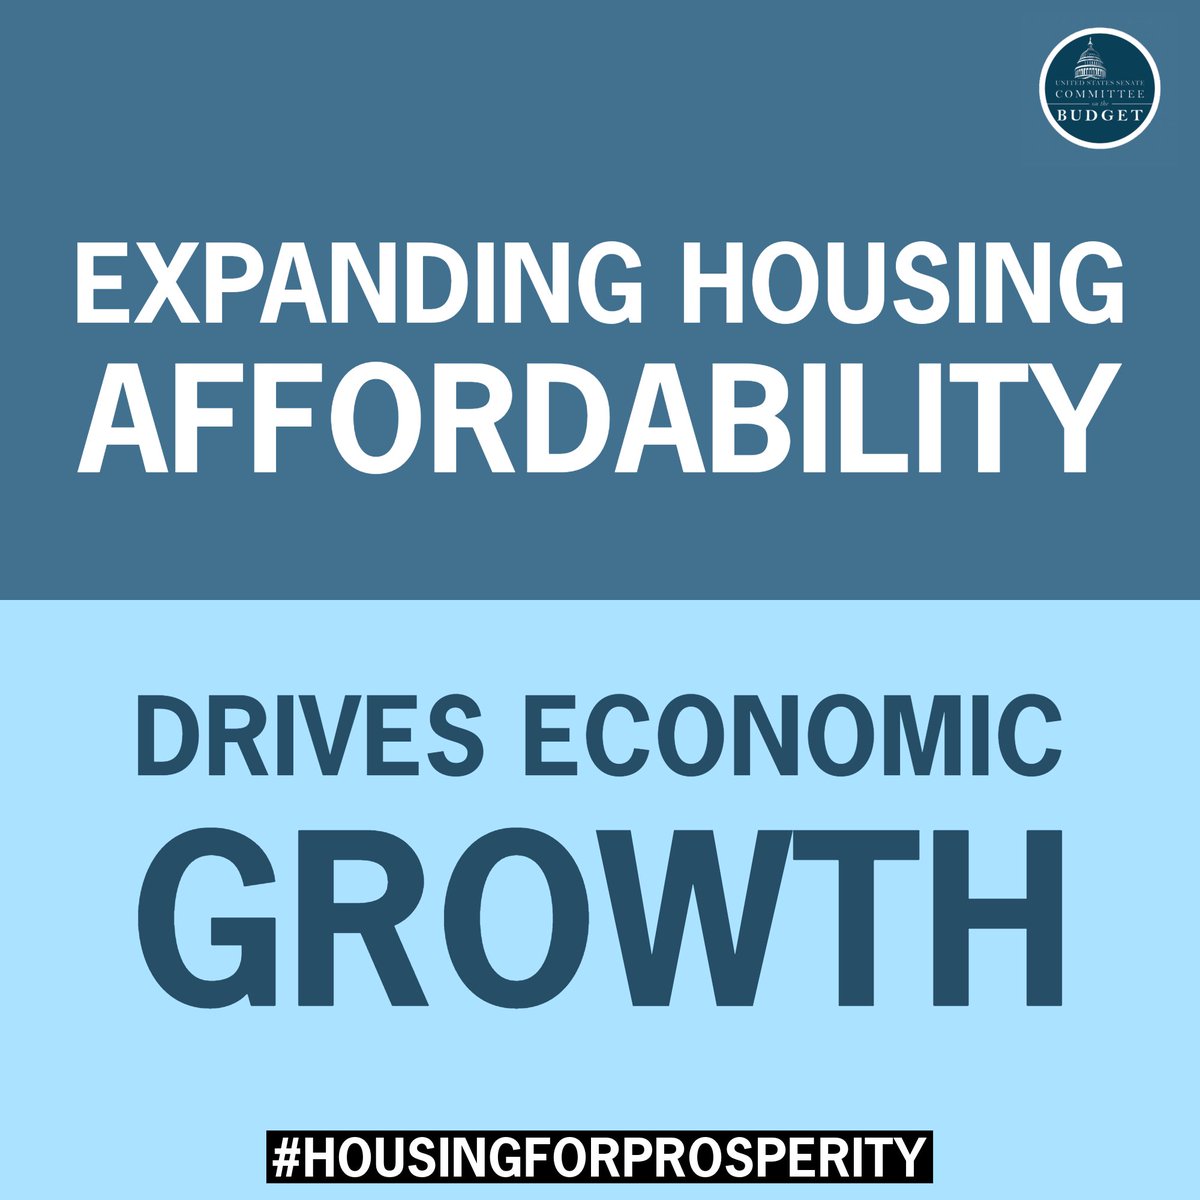 For decades, families have been burdened by unaffordable housing. Today at 10am: Our CEO, @Ventura_Carol_A, joins @SenateBudget to discuss expanding housing affordability to build a stronger economy. #HousingForProsperity   budget.senate.gov/hearings/a-blu…